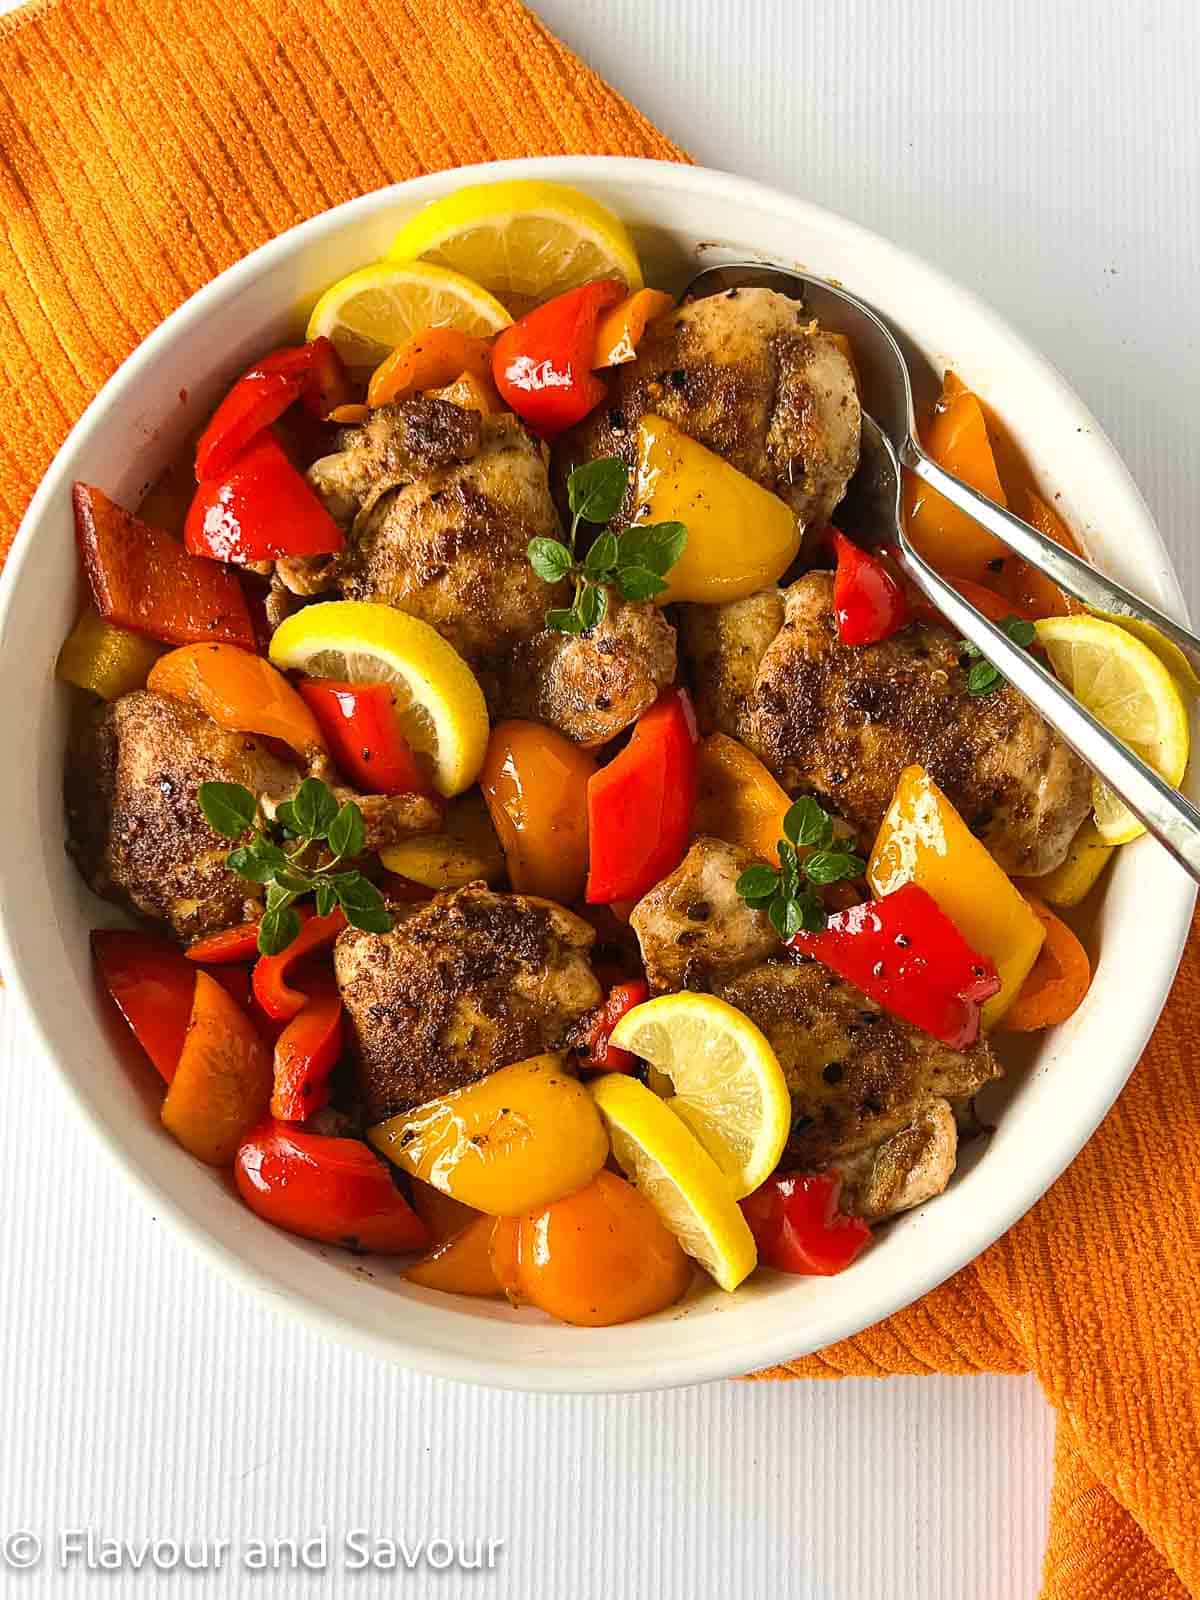 Moroccan chicken thighs and peppers in a serving bowl, garnished with lemon slices and herbs.